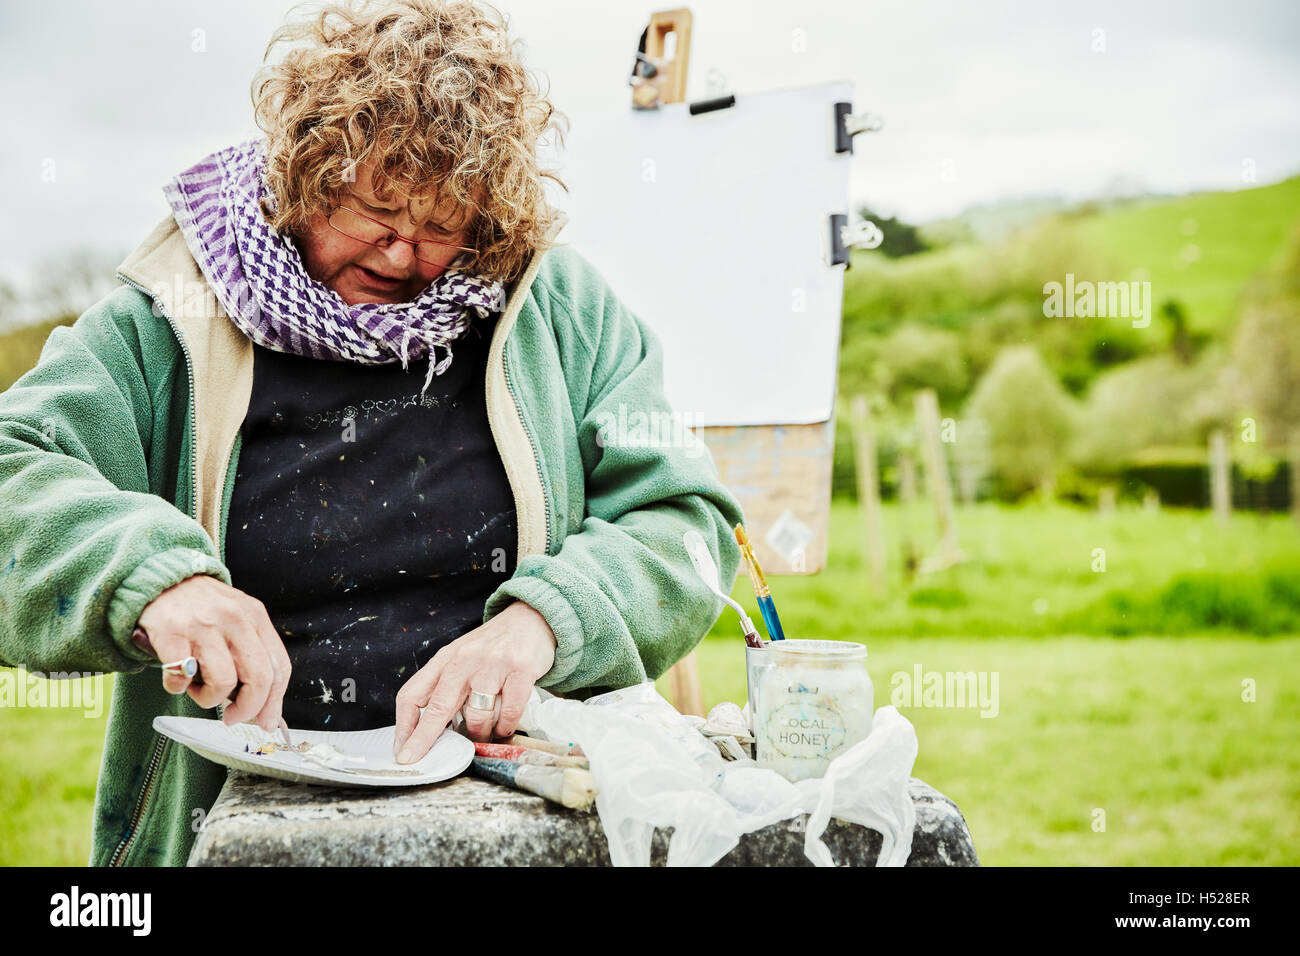 A woman artist working outdoors, sitting mixing or preparing paint on a paper plate. Stock Photo